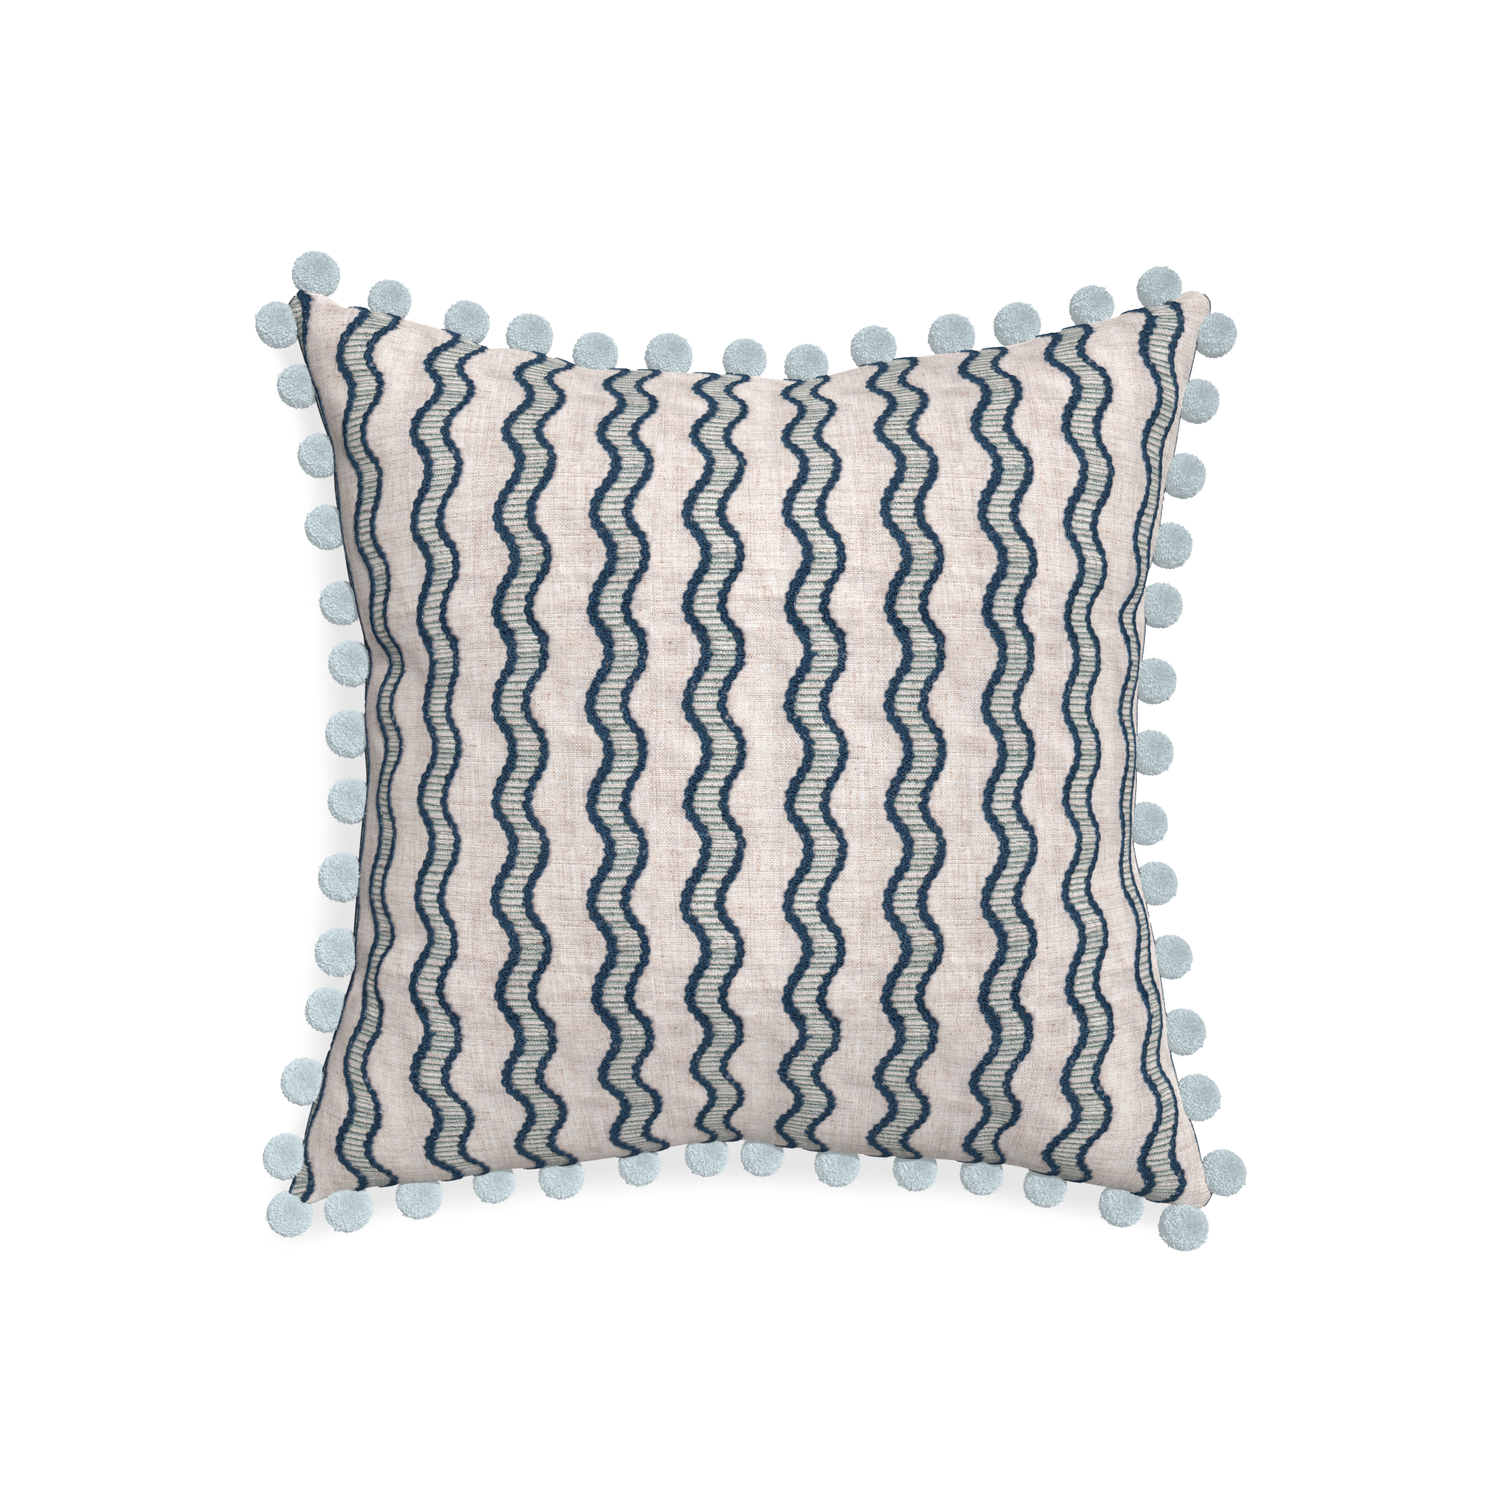 20-square beatrice custom embroidered wavepillow with powder pom pom on white background